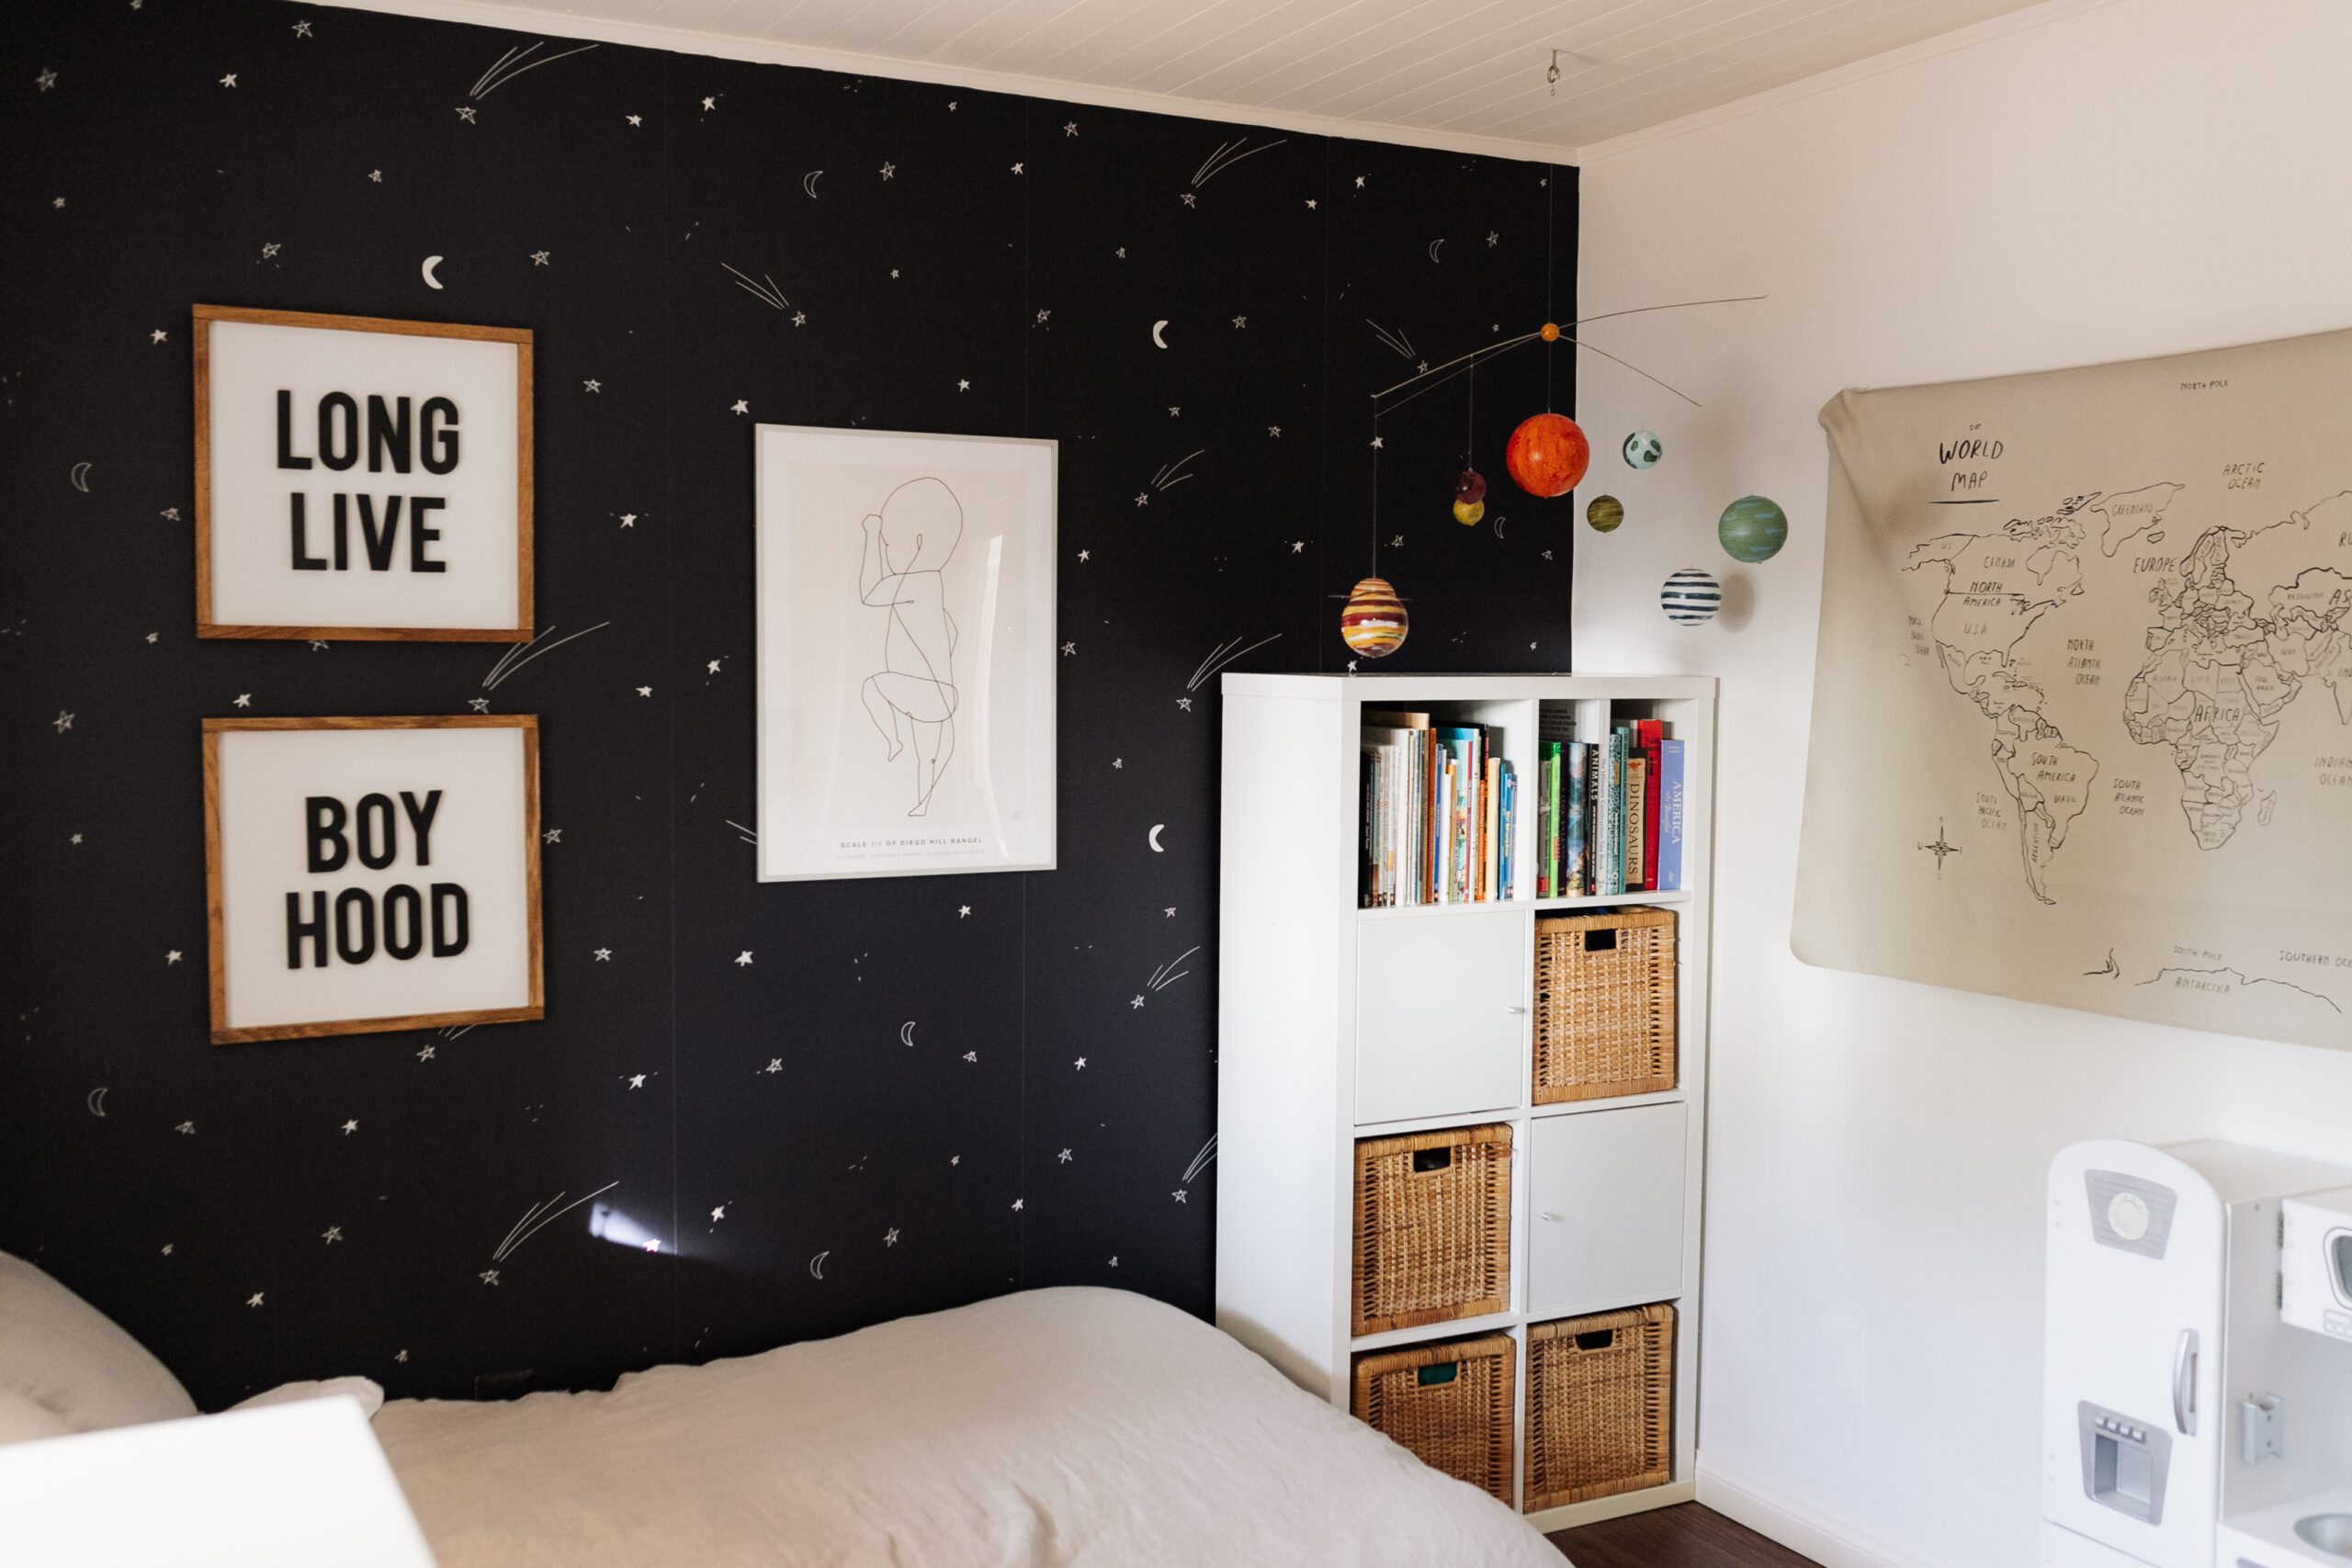 making the most out of the small "space" in this space-inspired bedroom for my boy #theldlhome #spaceroom #planets 